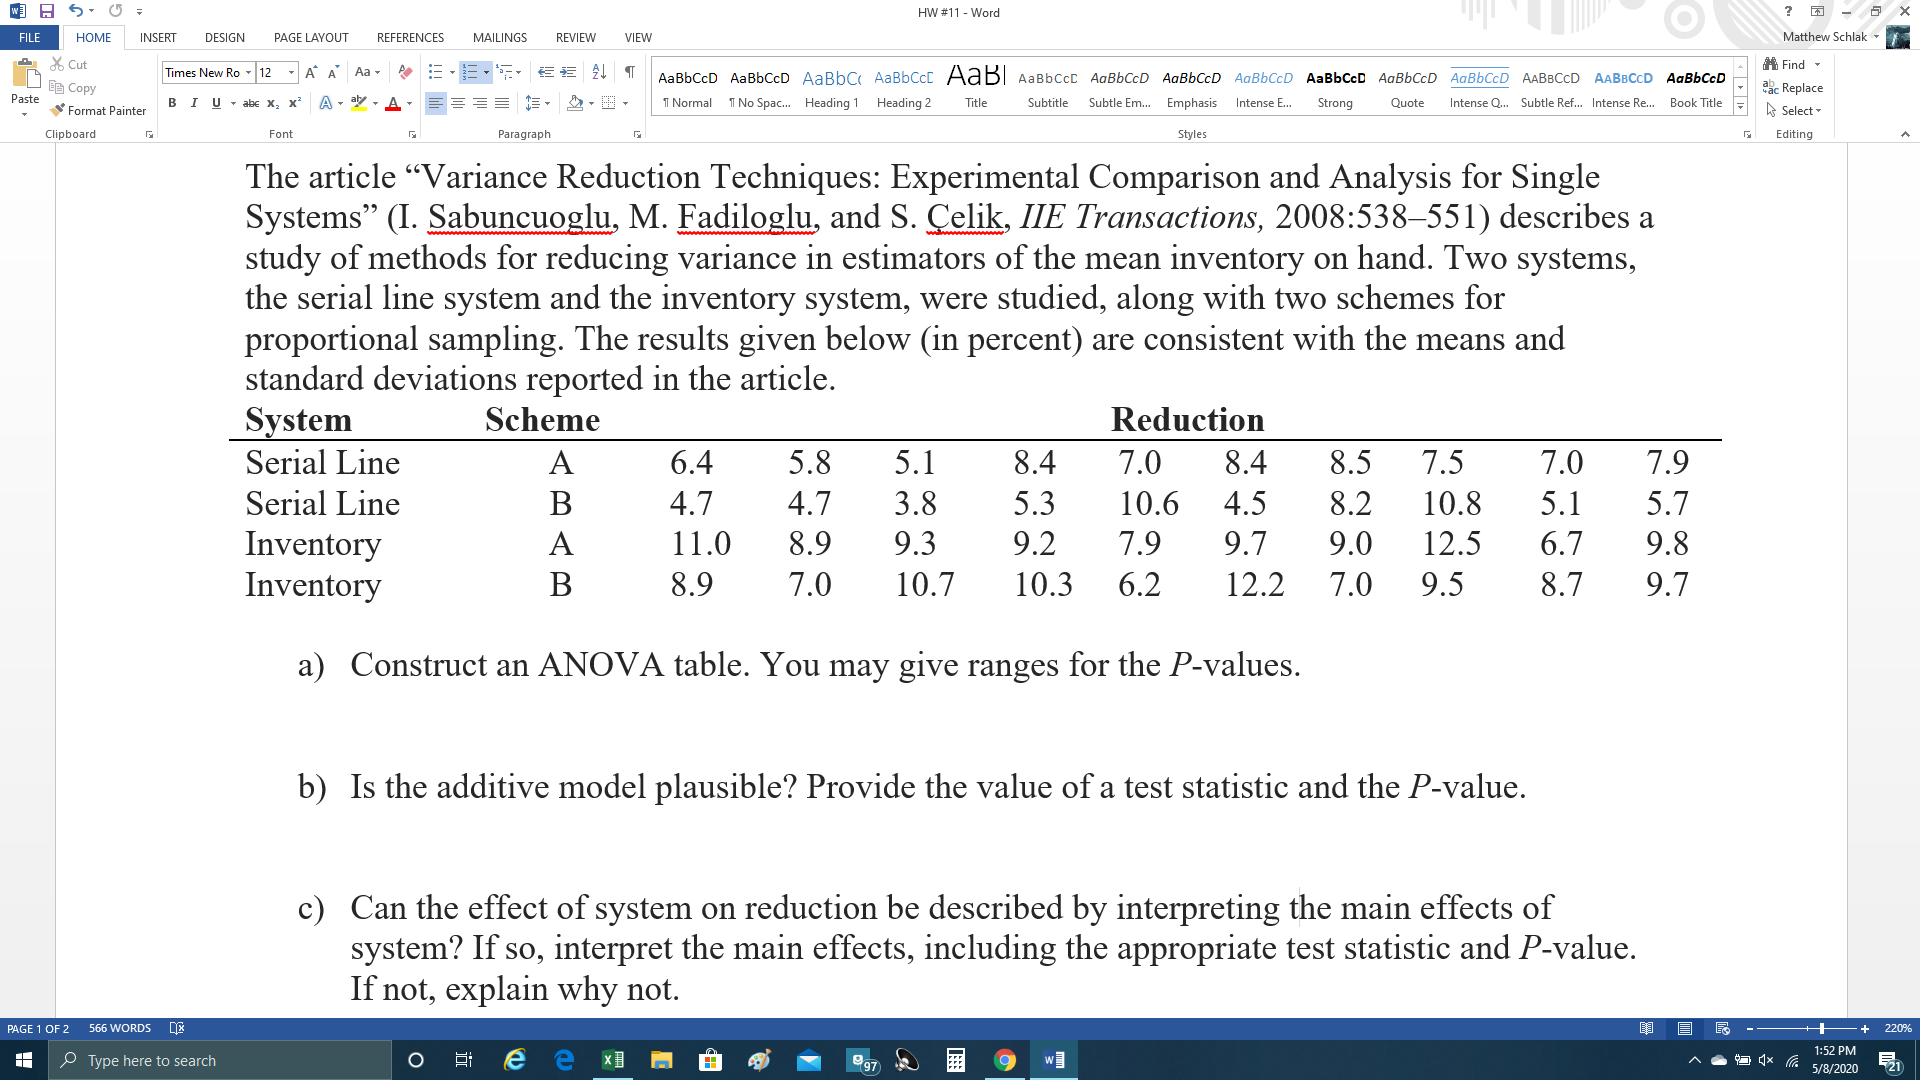 The article "Variance Reduction Techniques: Experimental Comparison and Analysis for Single
Systems" (I. Sabuncuoglu, M. Fadiloglu, and S. Çelik, IIE Transactions, 2008:538–551) describes a
study of methods for reducing variance in estimators of the mean inventory on hand. Two systems,
the serial line system and the inventory system, were studied, along with two schemes for
proportional sampling. The results given below (in percent) are consistent with the means and
standard deviations reported in the article.
